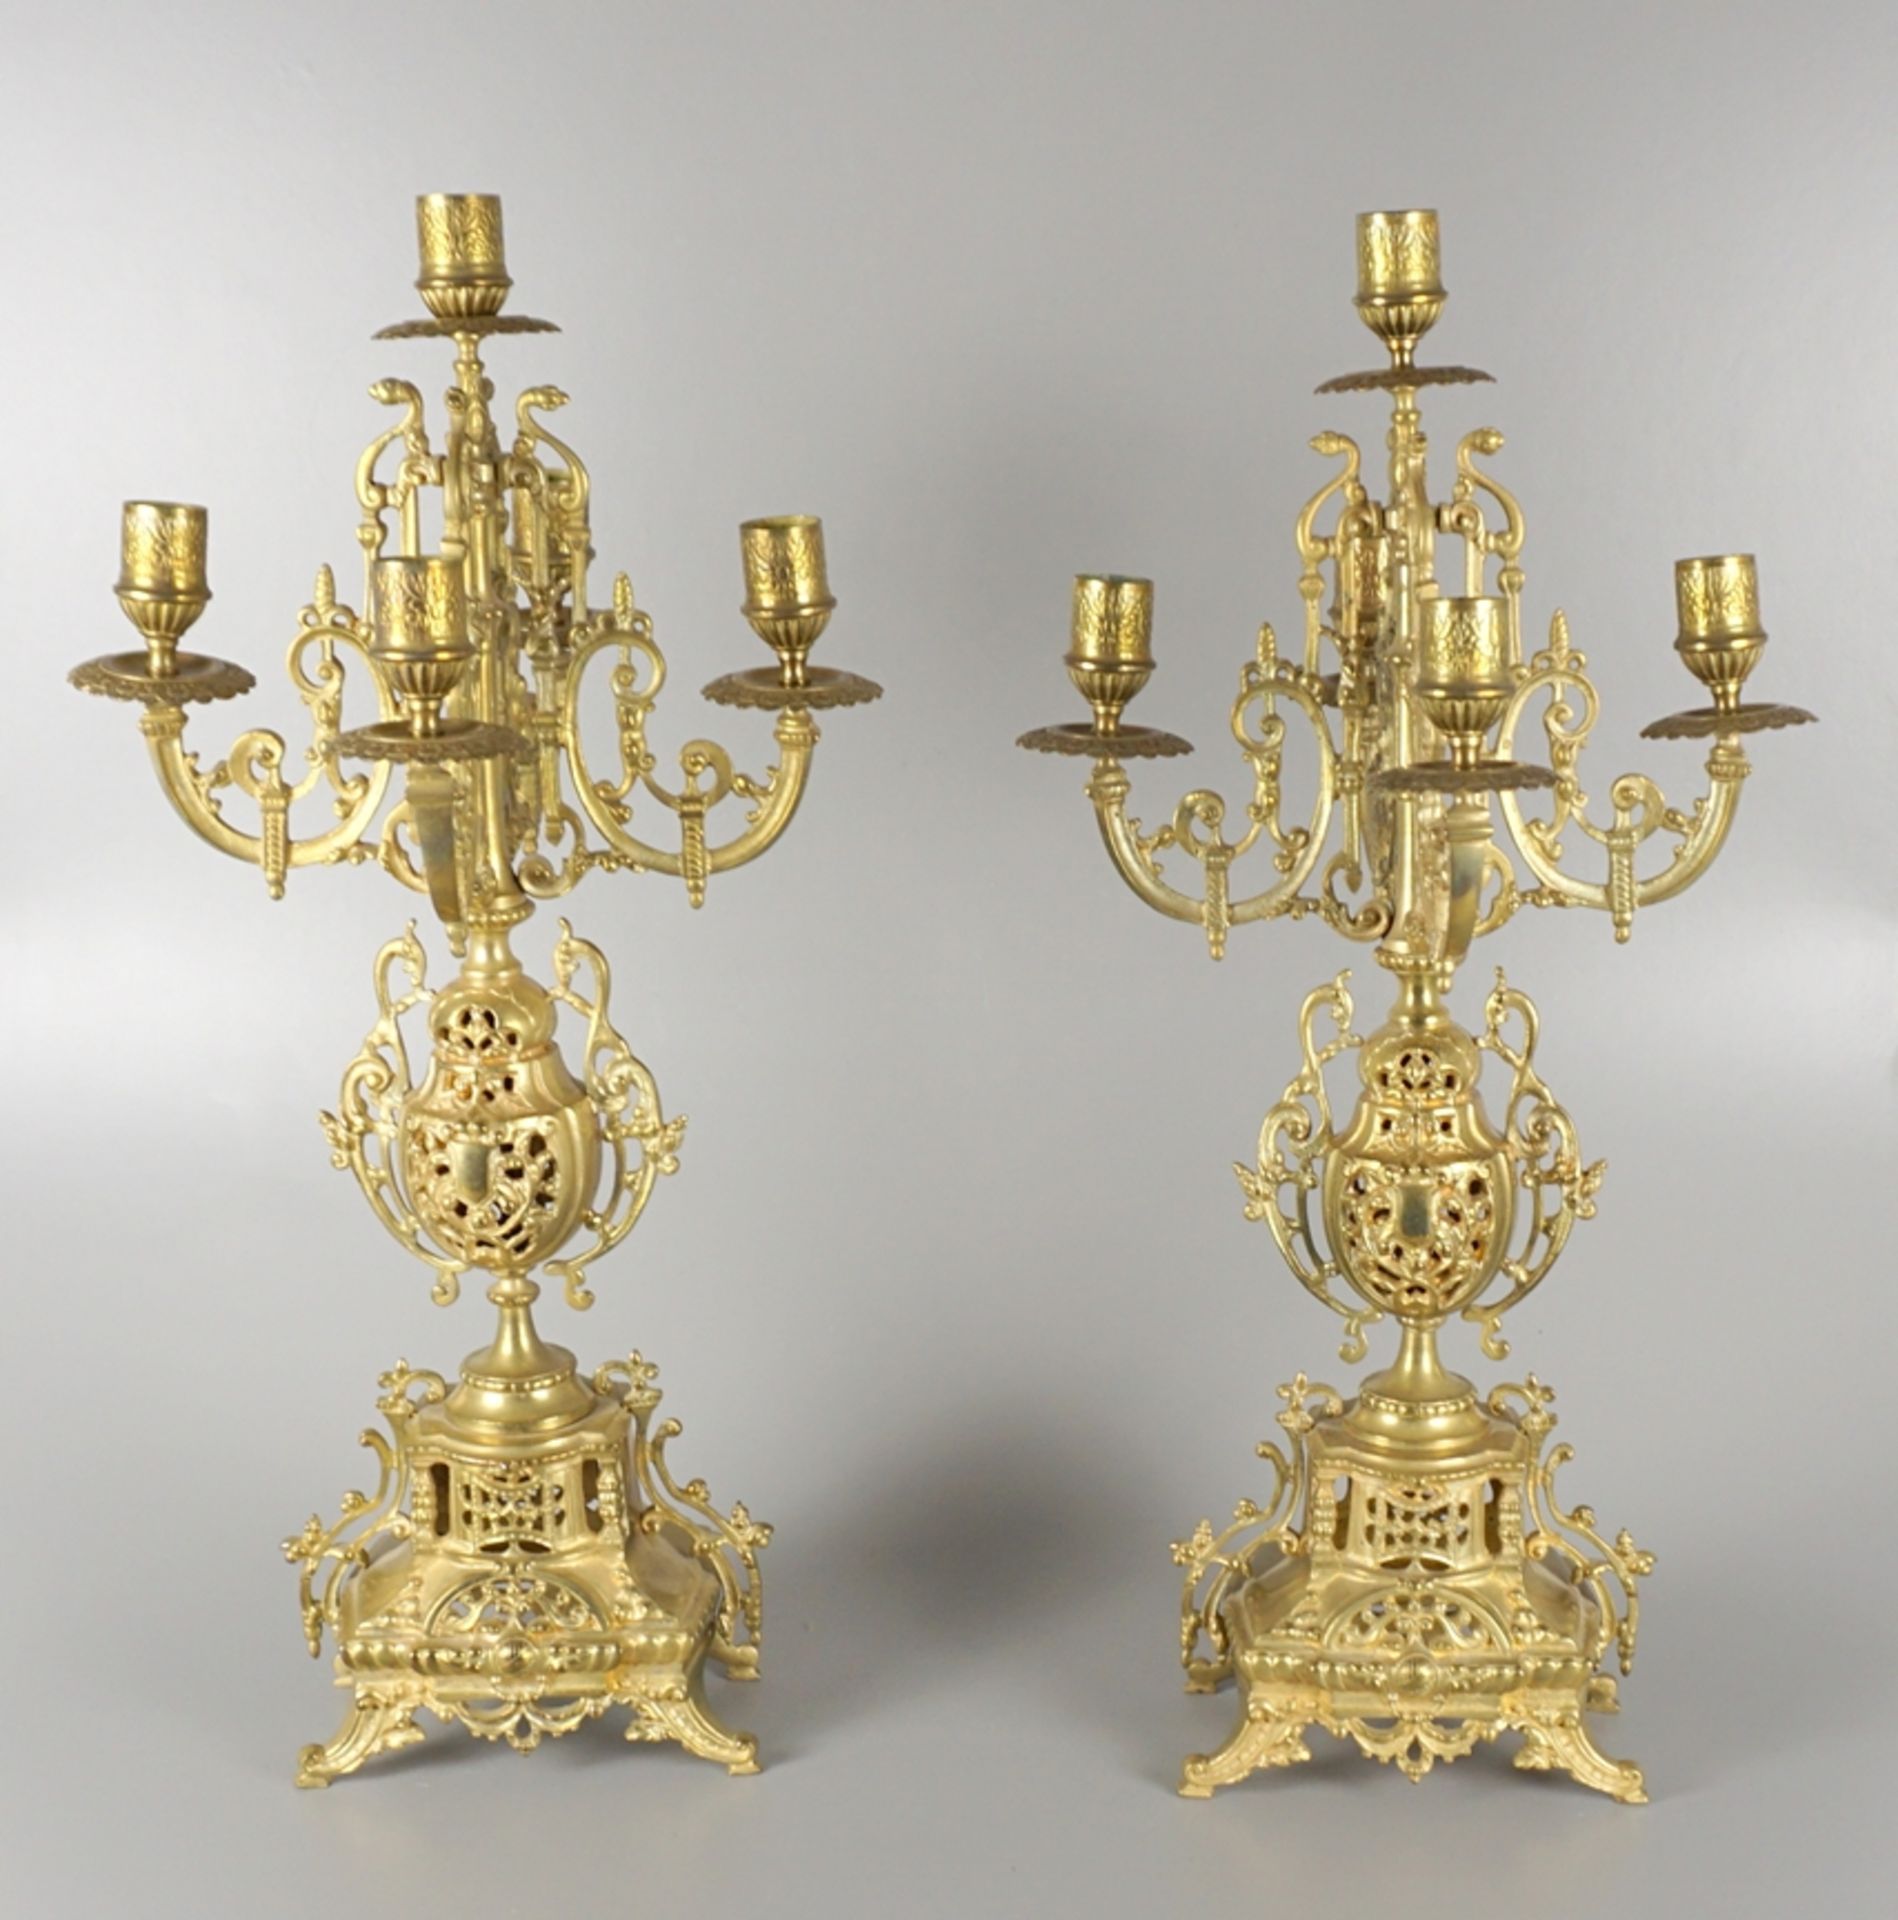 magnificent mantel clock with side plates, brass, 20th cent. - Image 2 of 5